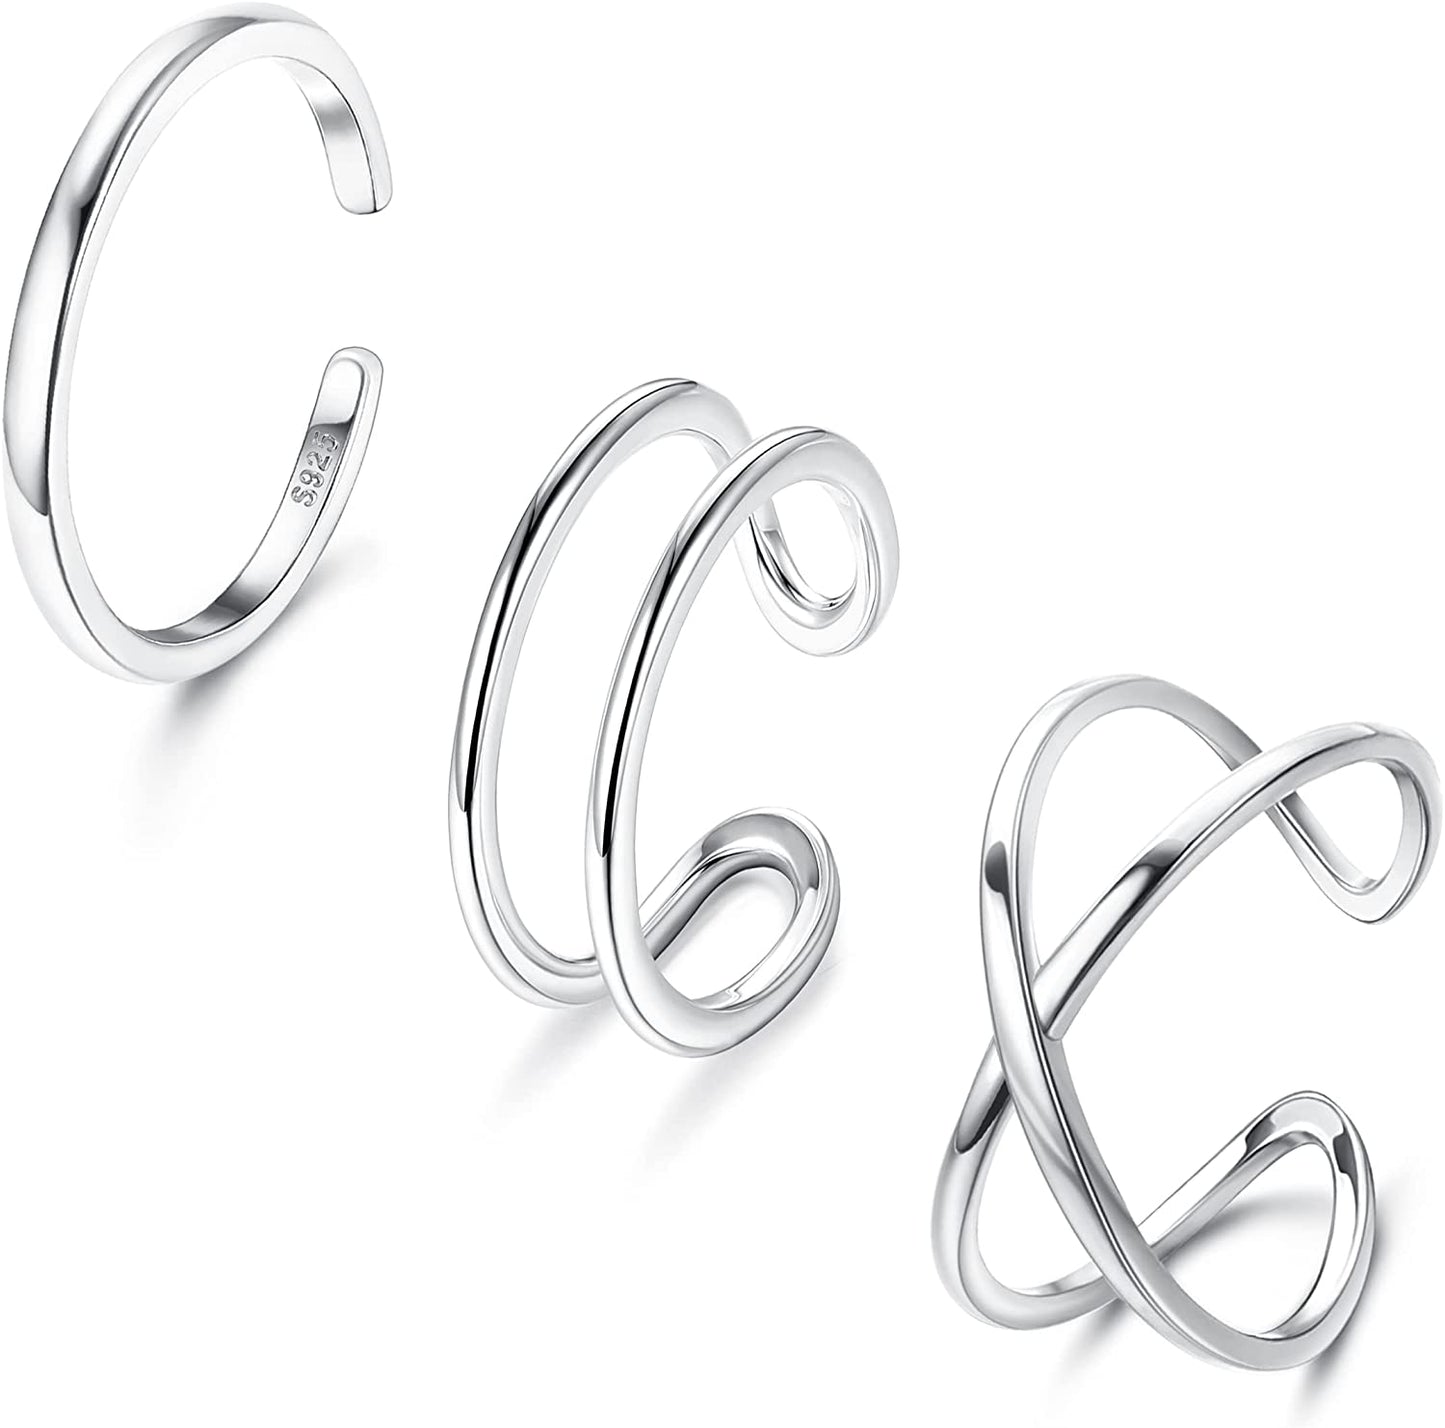 3Pcs 925 Sterling Silver Open Adjustable Rings for Women Men Stackable Cross Arrow Heart Moon&Star Paperclip Rings Hypoallergenic Thumb Knuckle Simple Ring Set Size 6-9